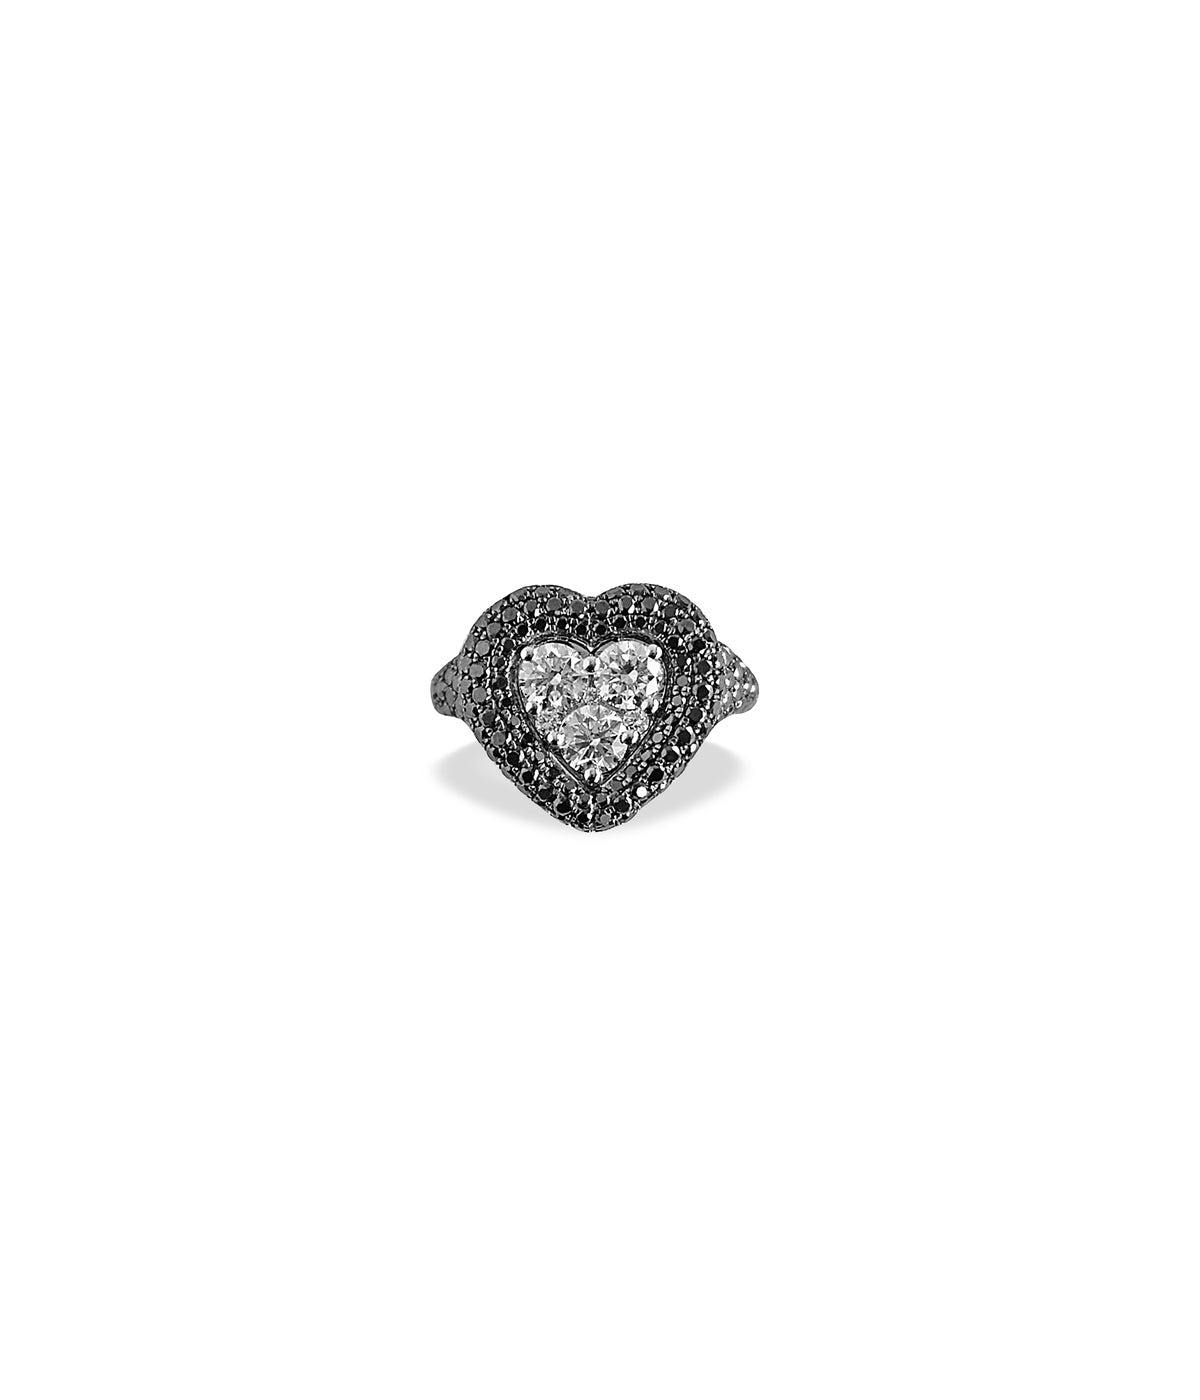 The Manaal 18k white gold diamond pinky ring